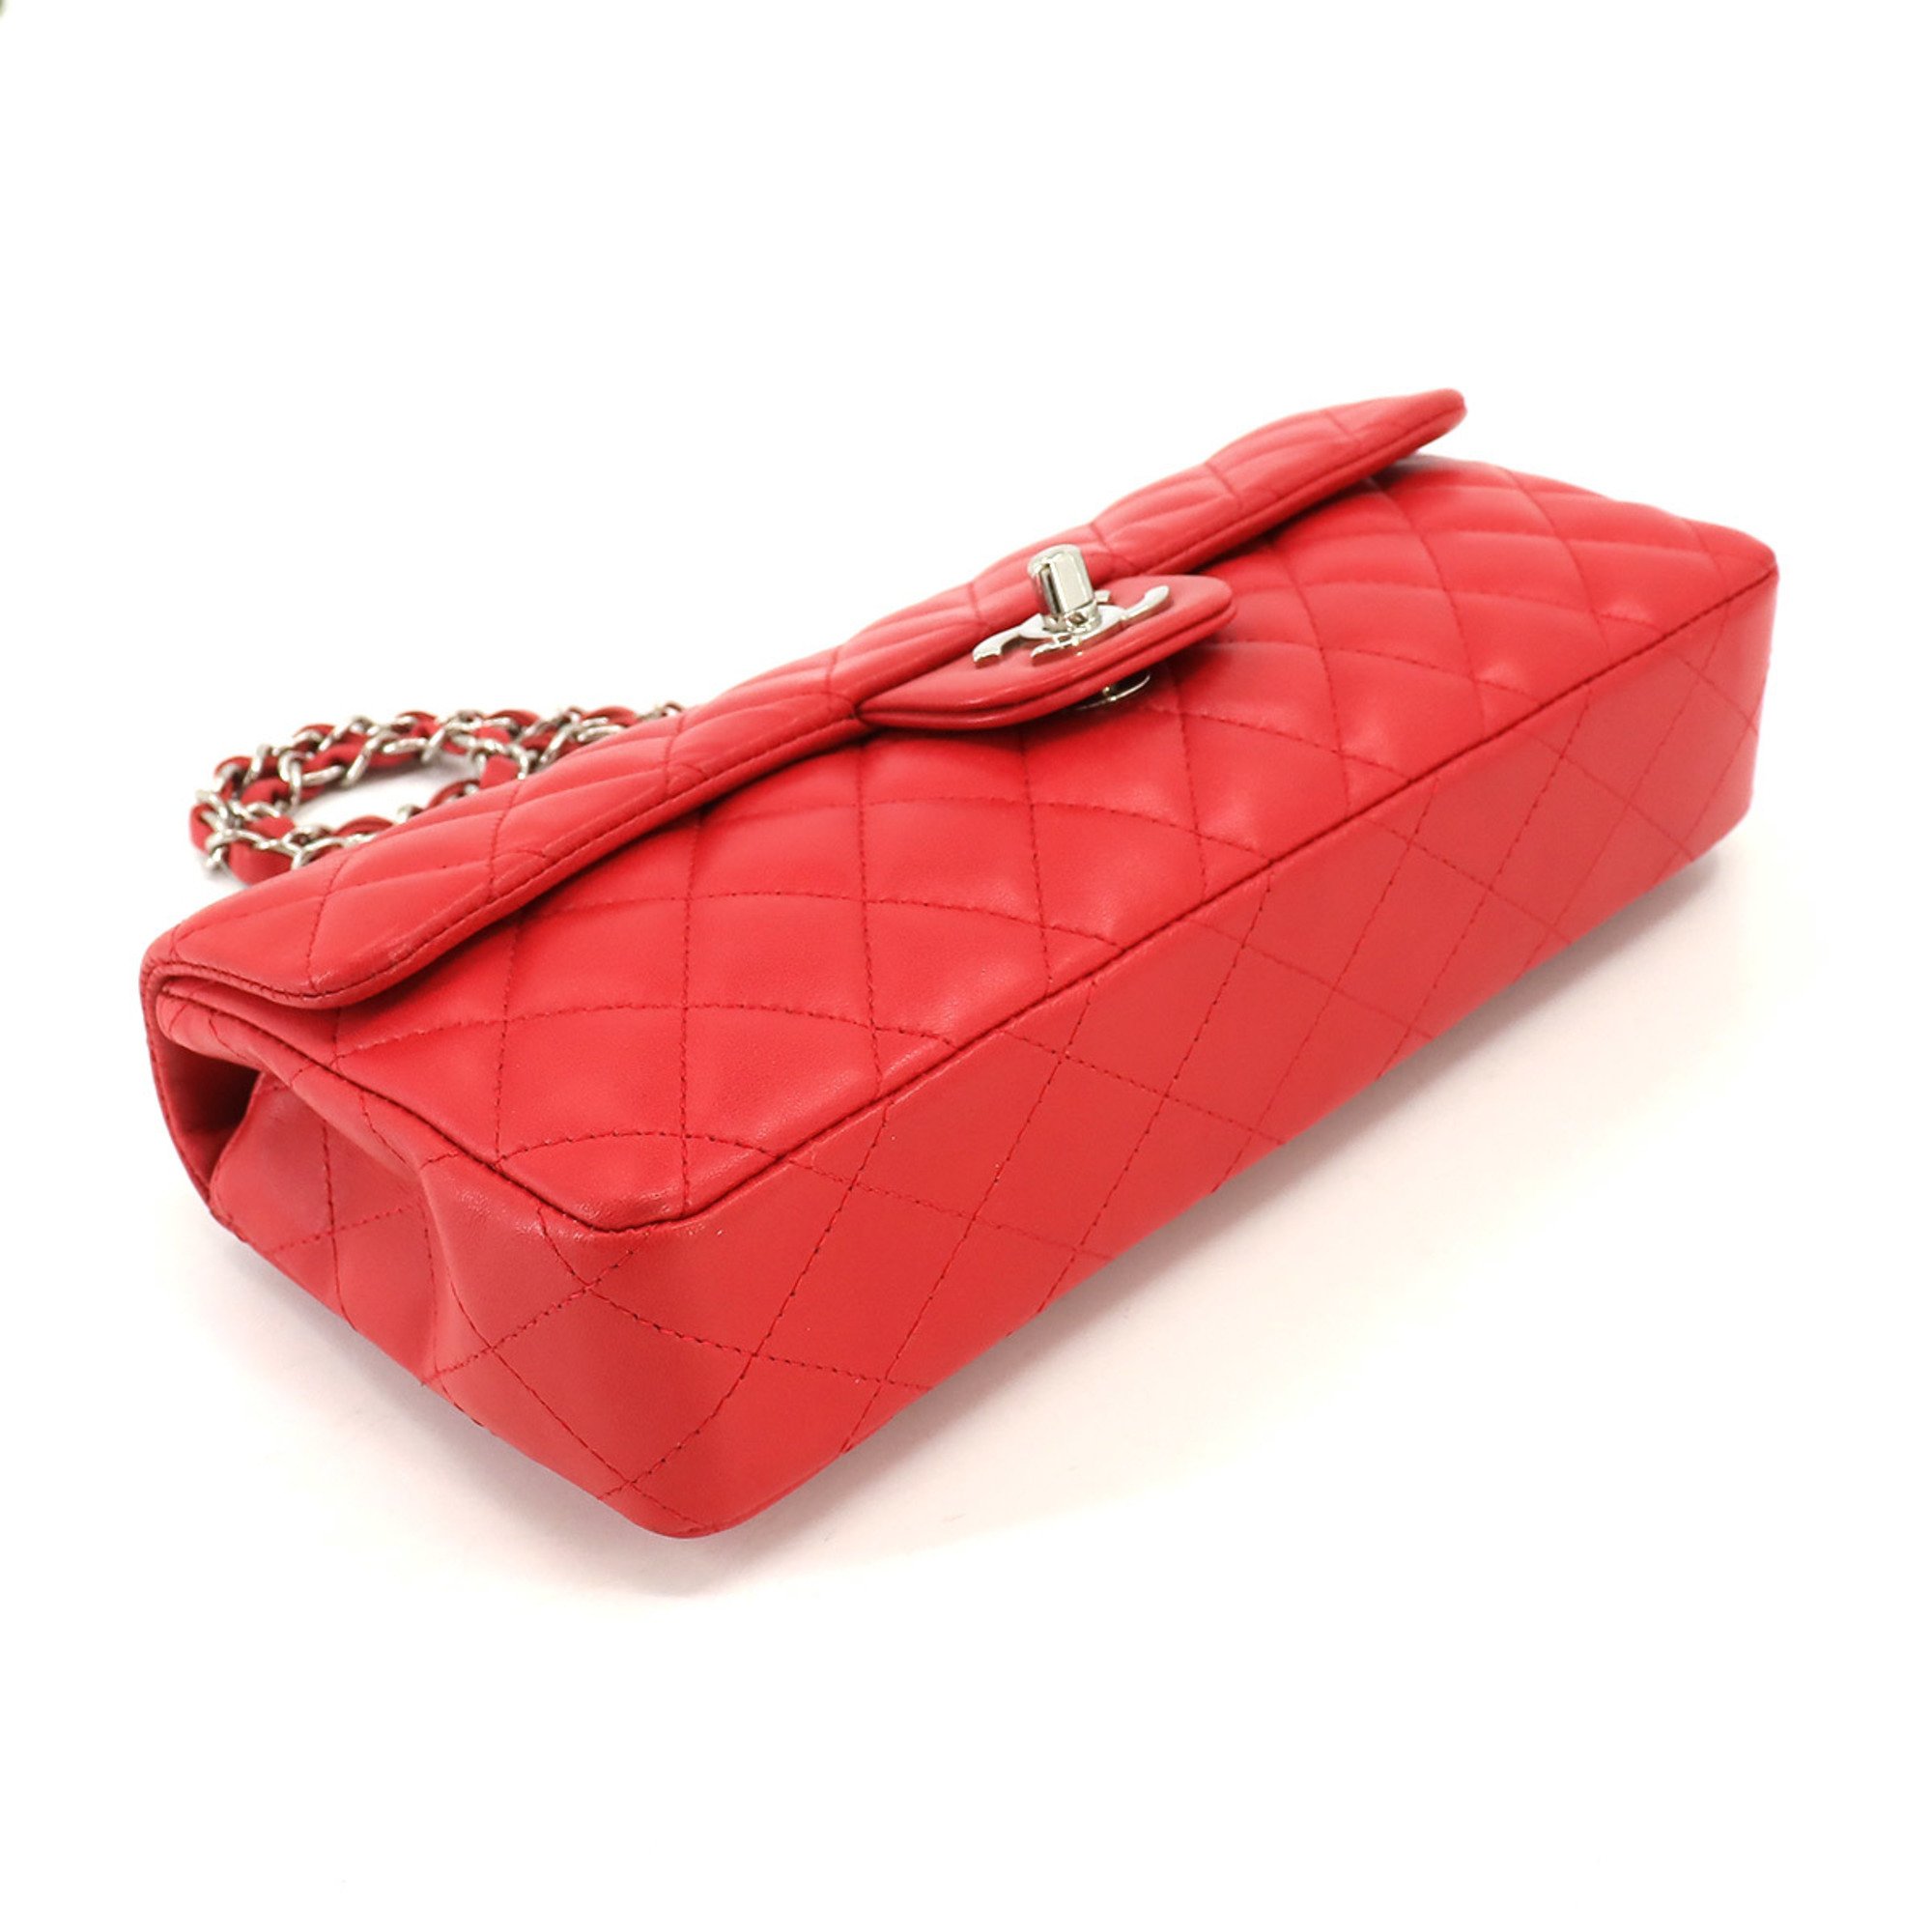 CHANEL Matelasse chain shoulder bag leather red silver metal fittings here mark Bag